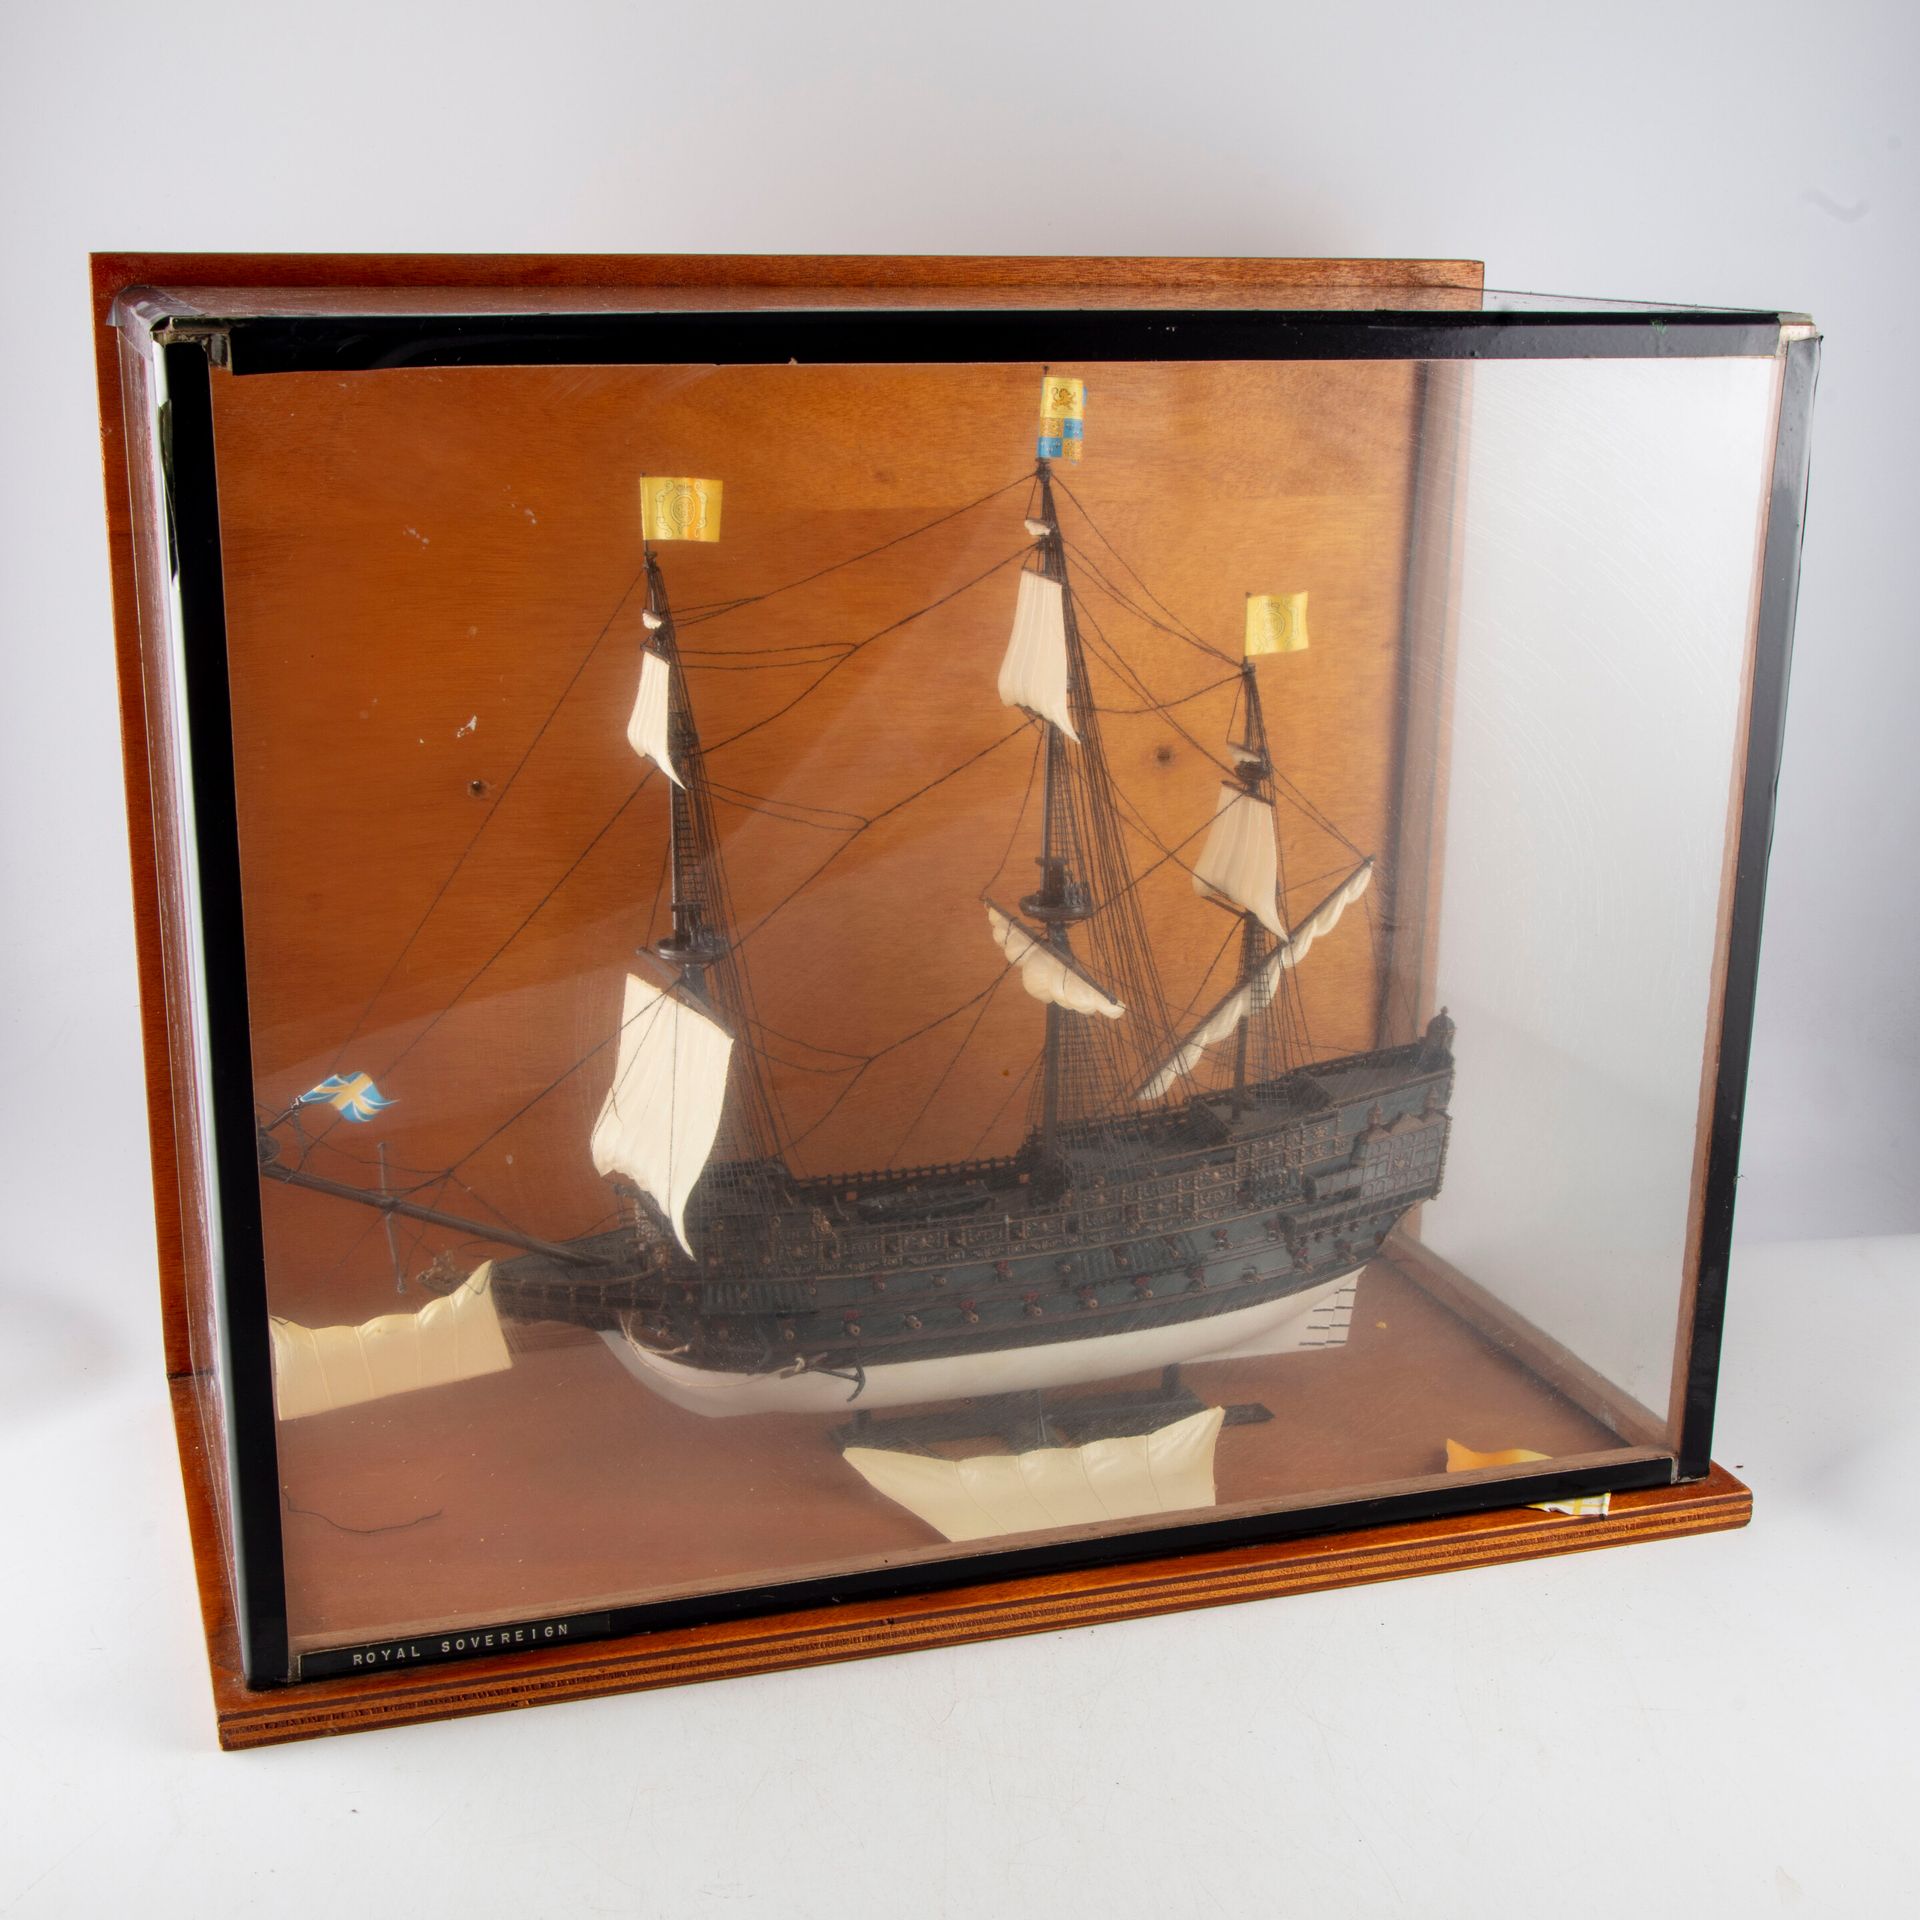 Null Model ship "Royal Sovereign 1637" in painted wood

Under glass

44 x 39 cm &hellip;